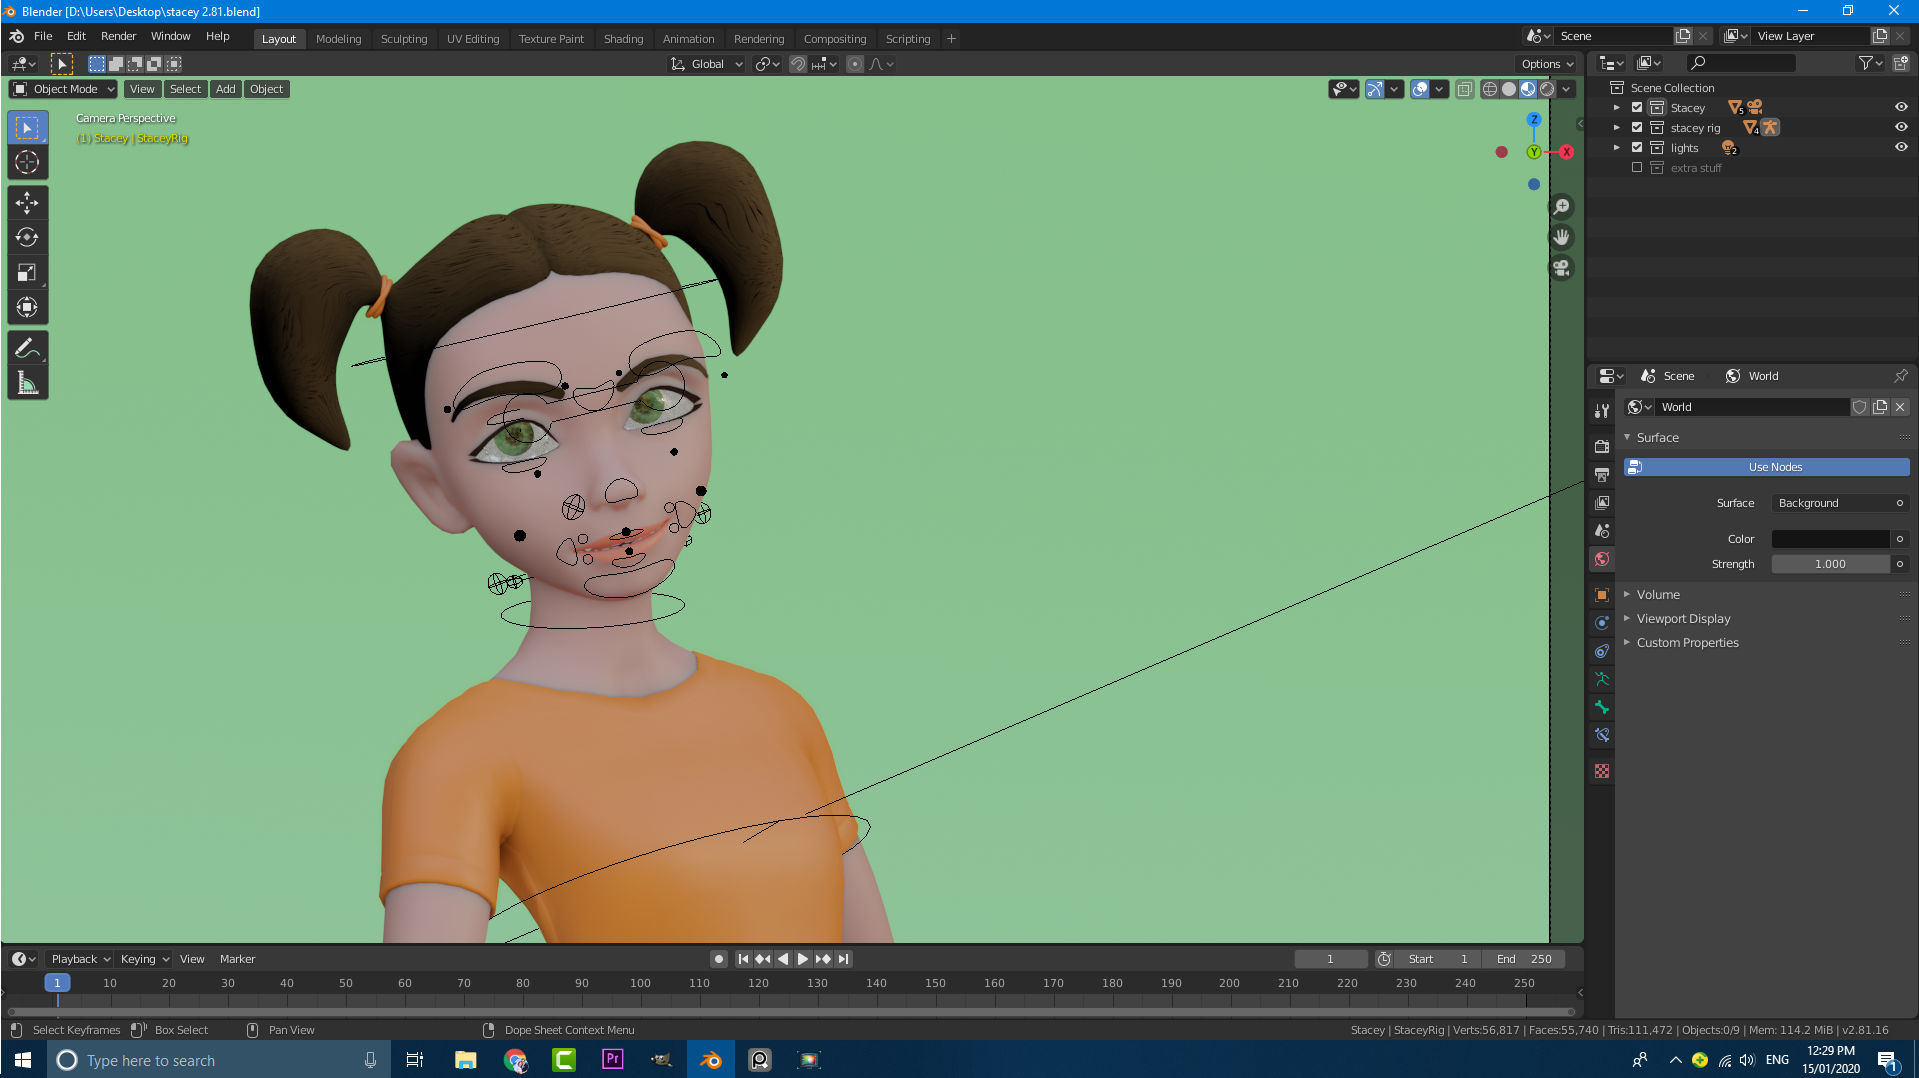 Stacey_Rigged Character_Eevee 2.8+ preview image 1